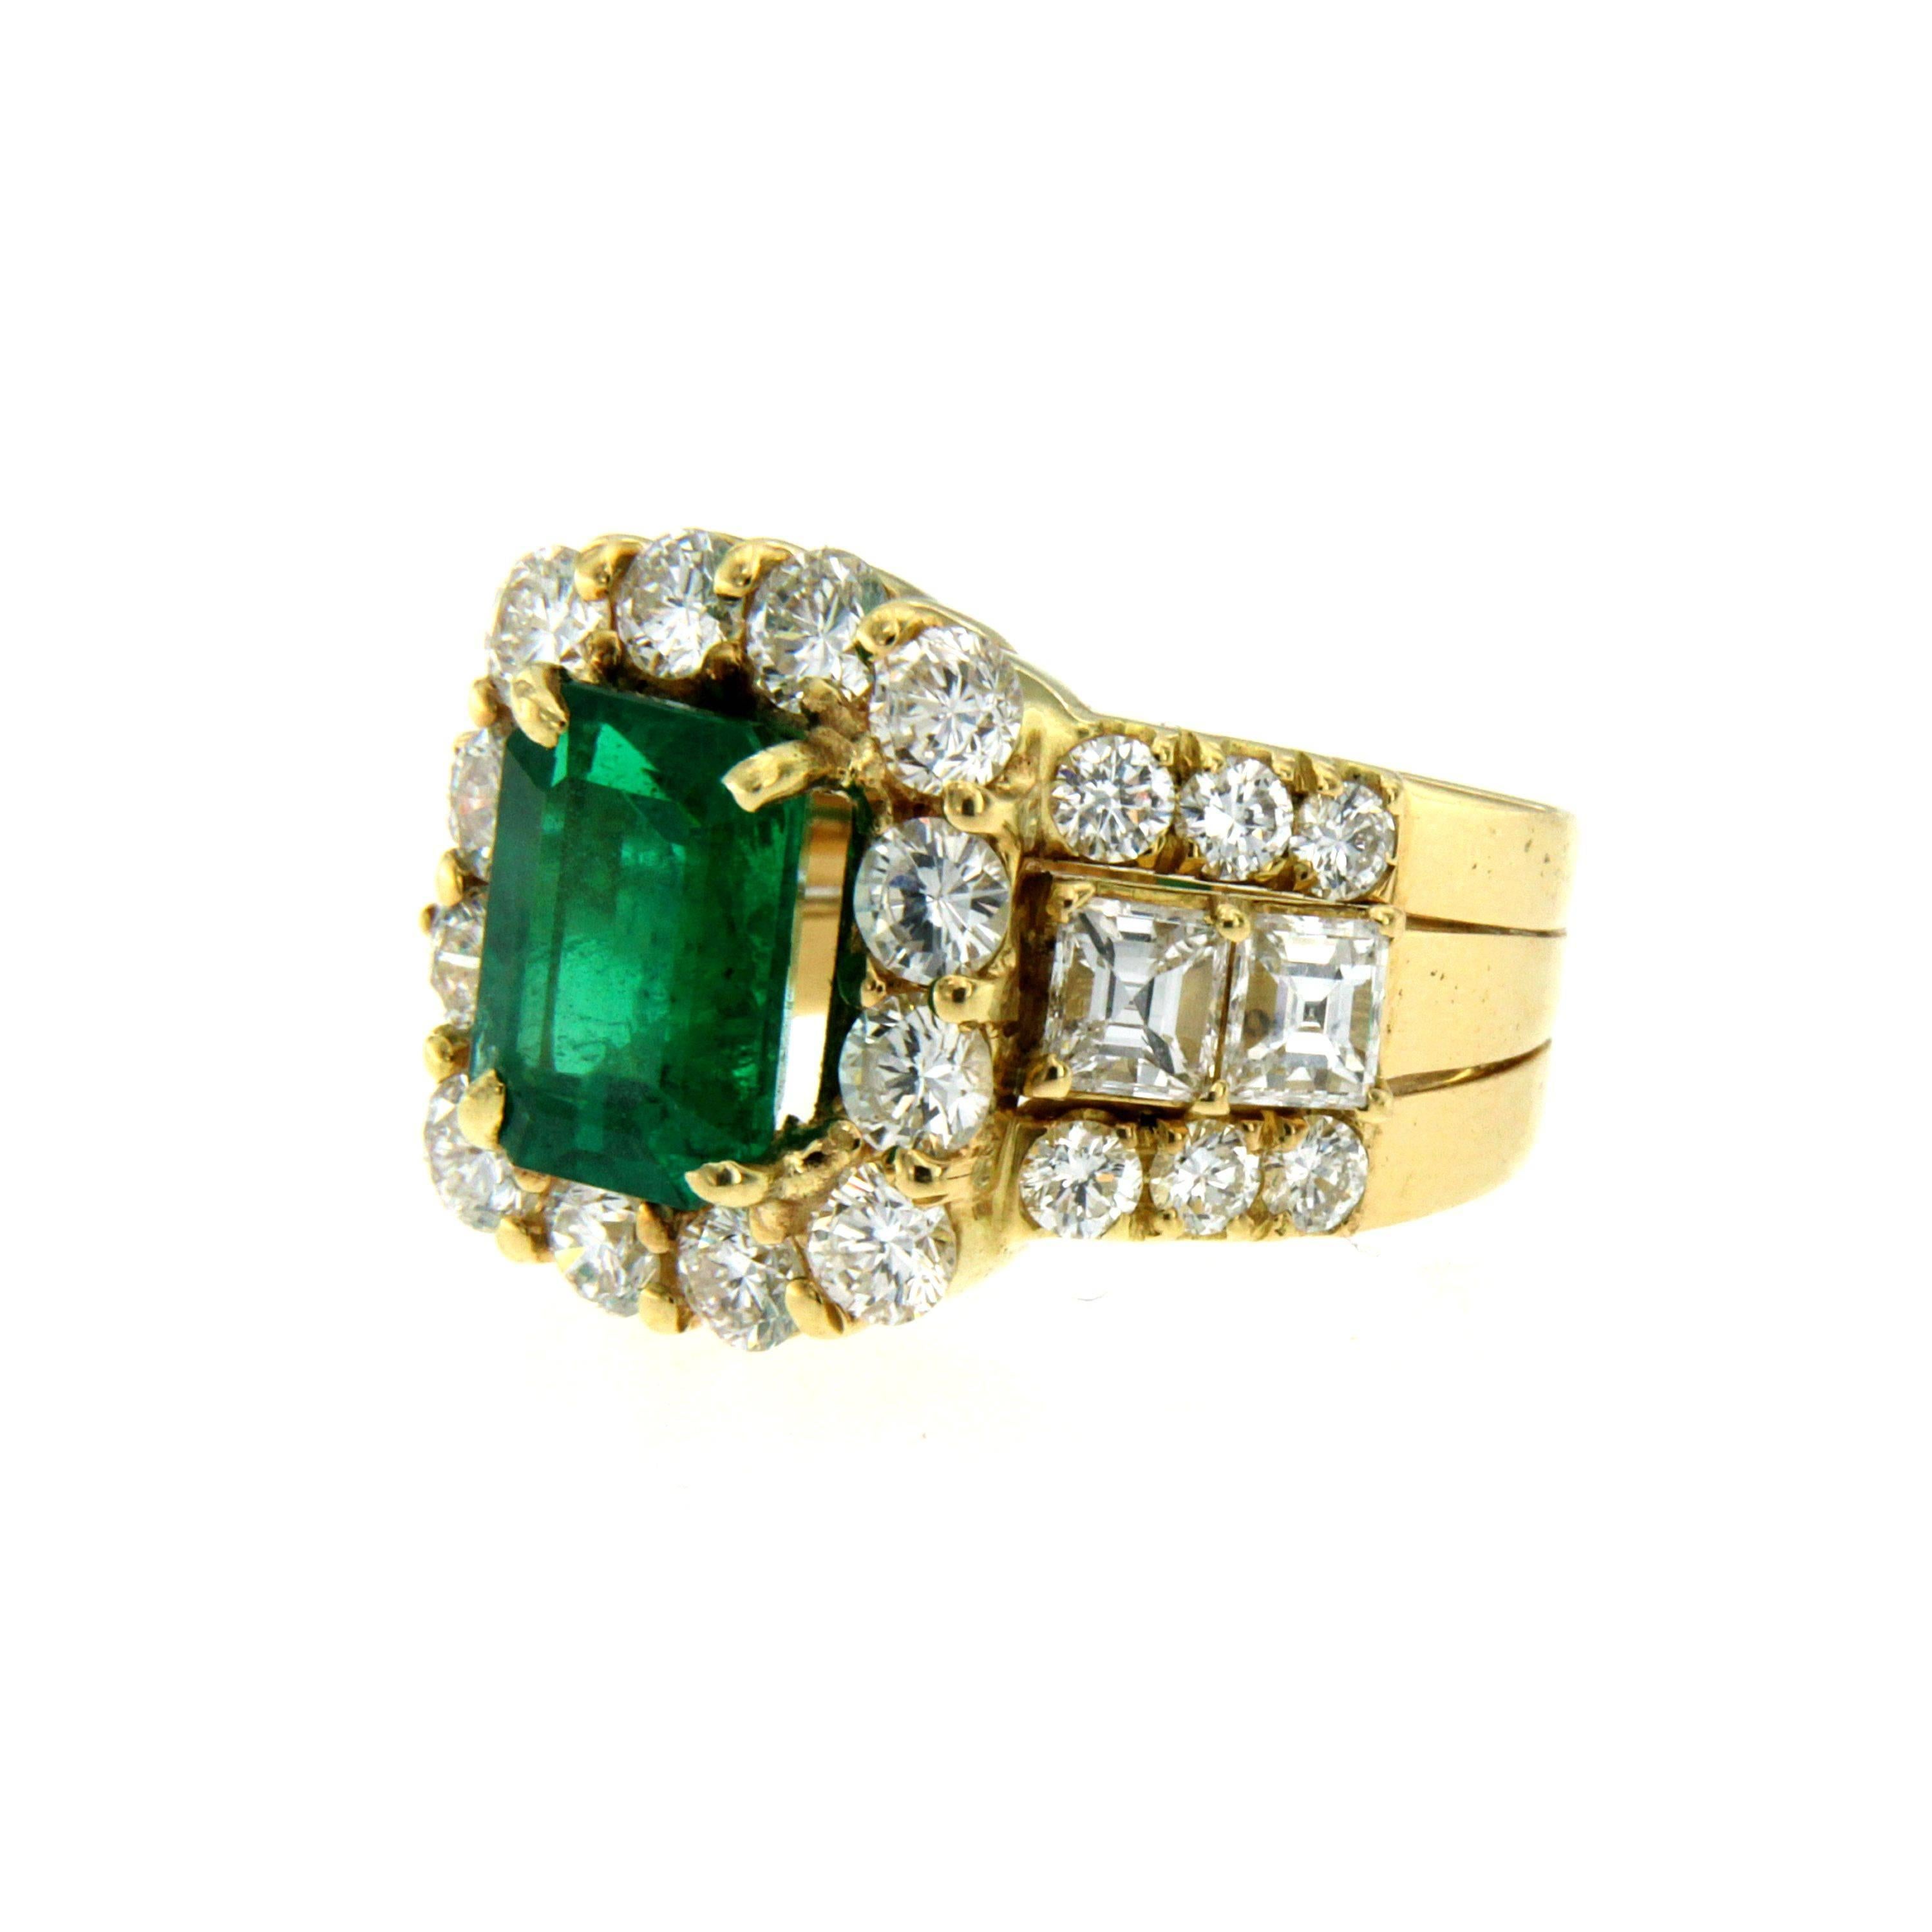 Emerald and Diamonds cocktail ring, handmade in 18k yellow gold.

An important 18k yellow gold mount showcasing an exceptional emerald-cut Emerald weighing approx. 2.80 carats, framed by 24 large, fine quality, round brilliant-cut diamonds and two